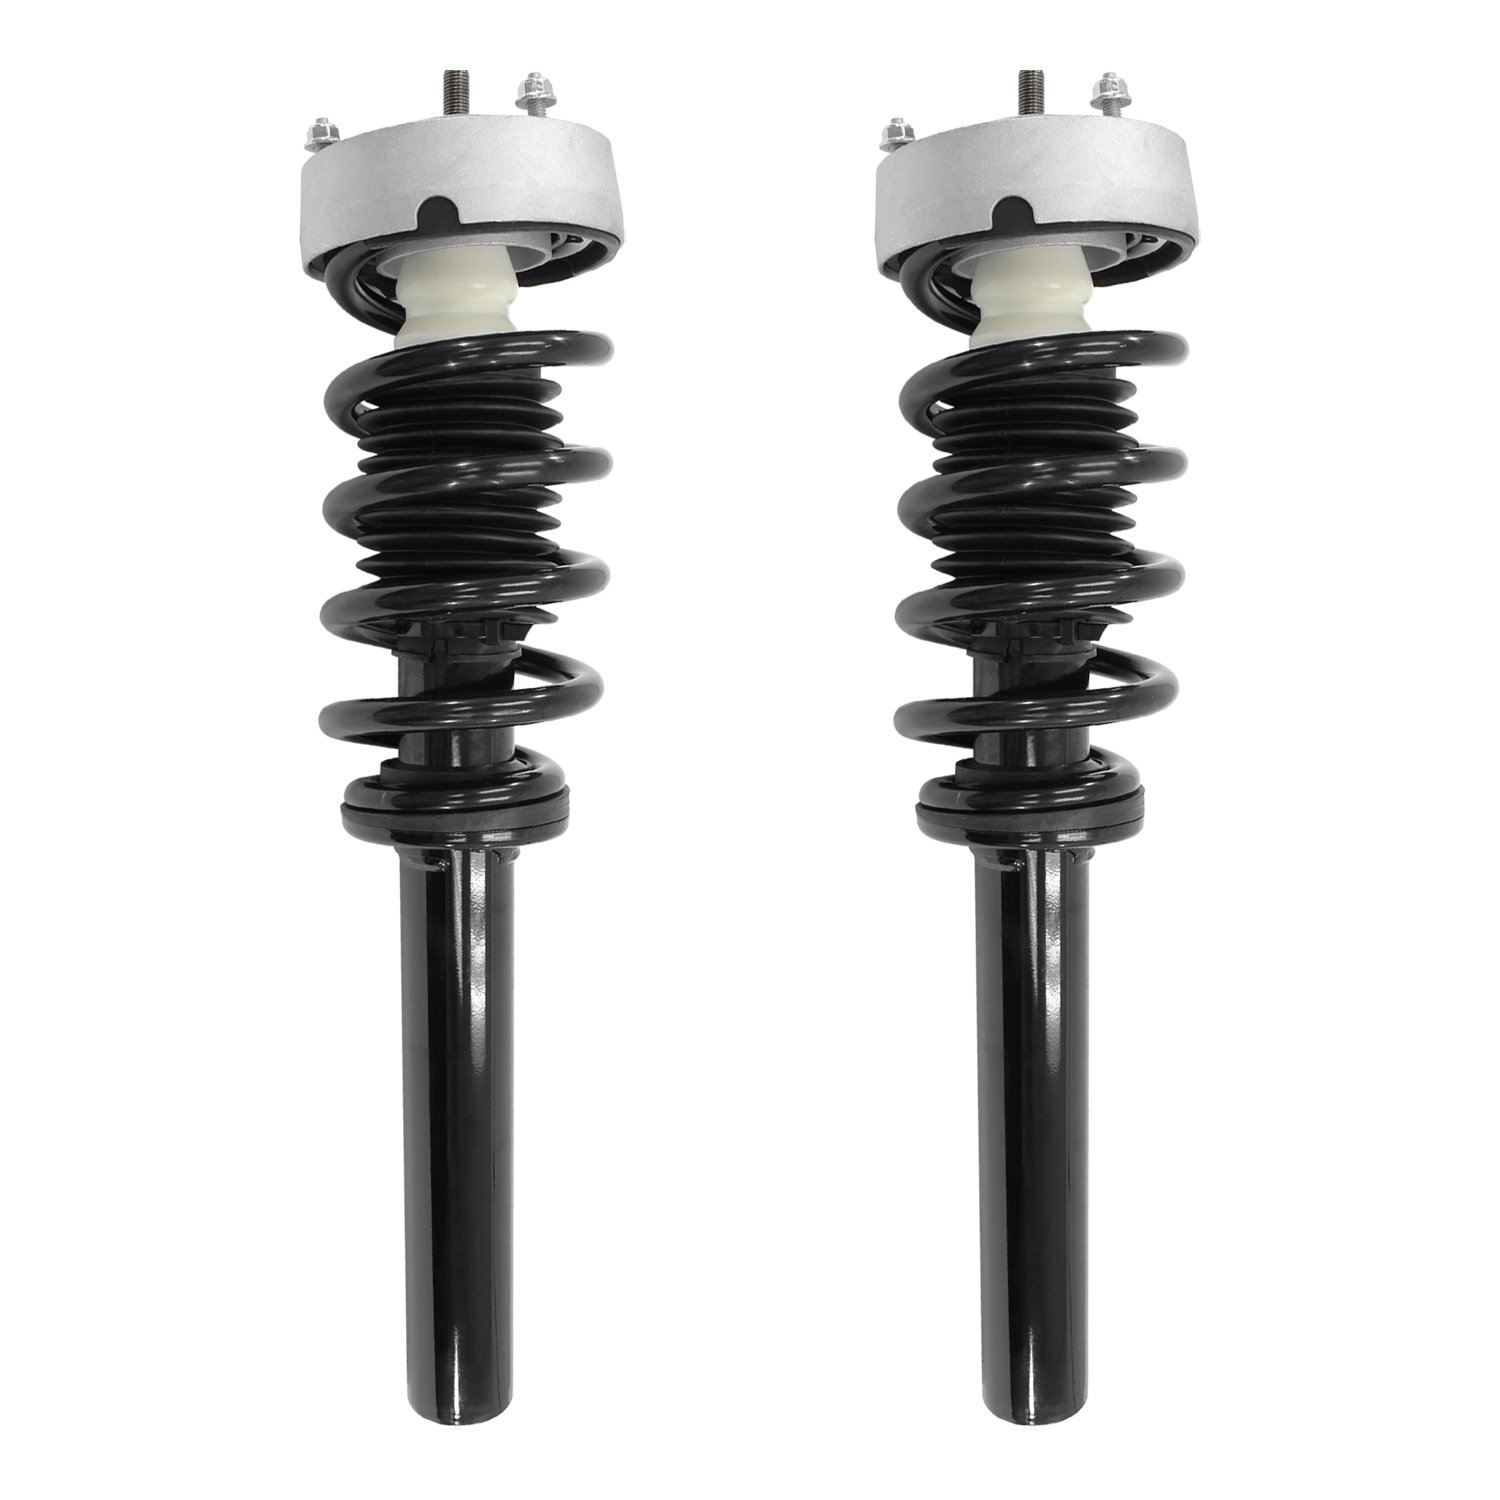 2-13480-001 Front Suspension Strut & Coil Spring Assemby Set Fits Select BMW X5, BMW X6